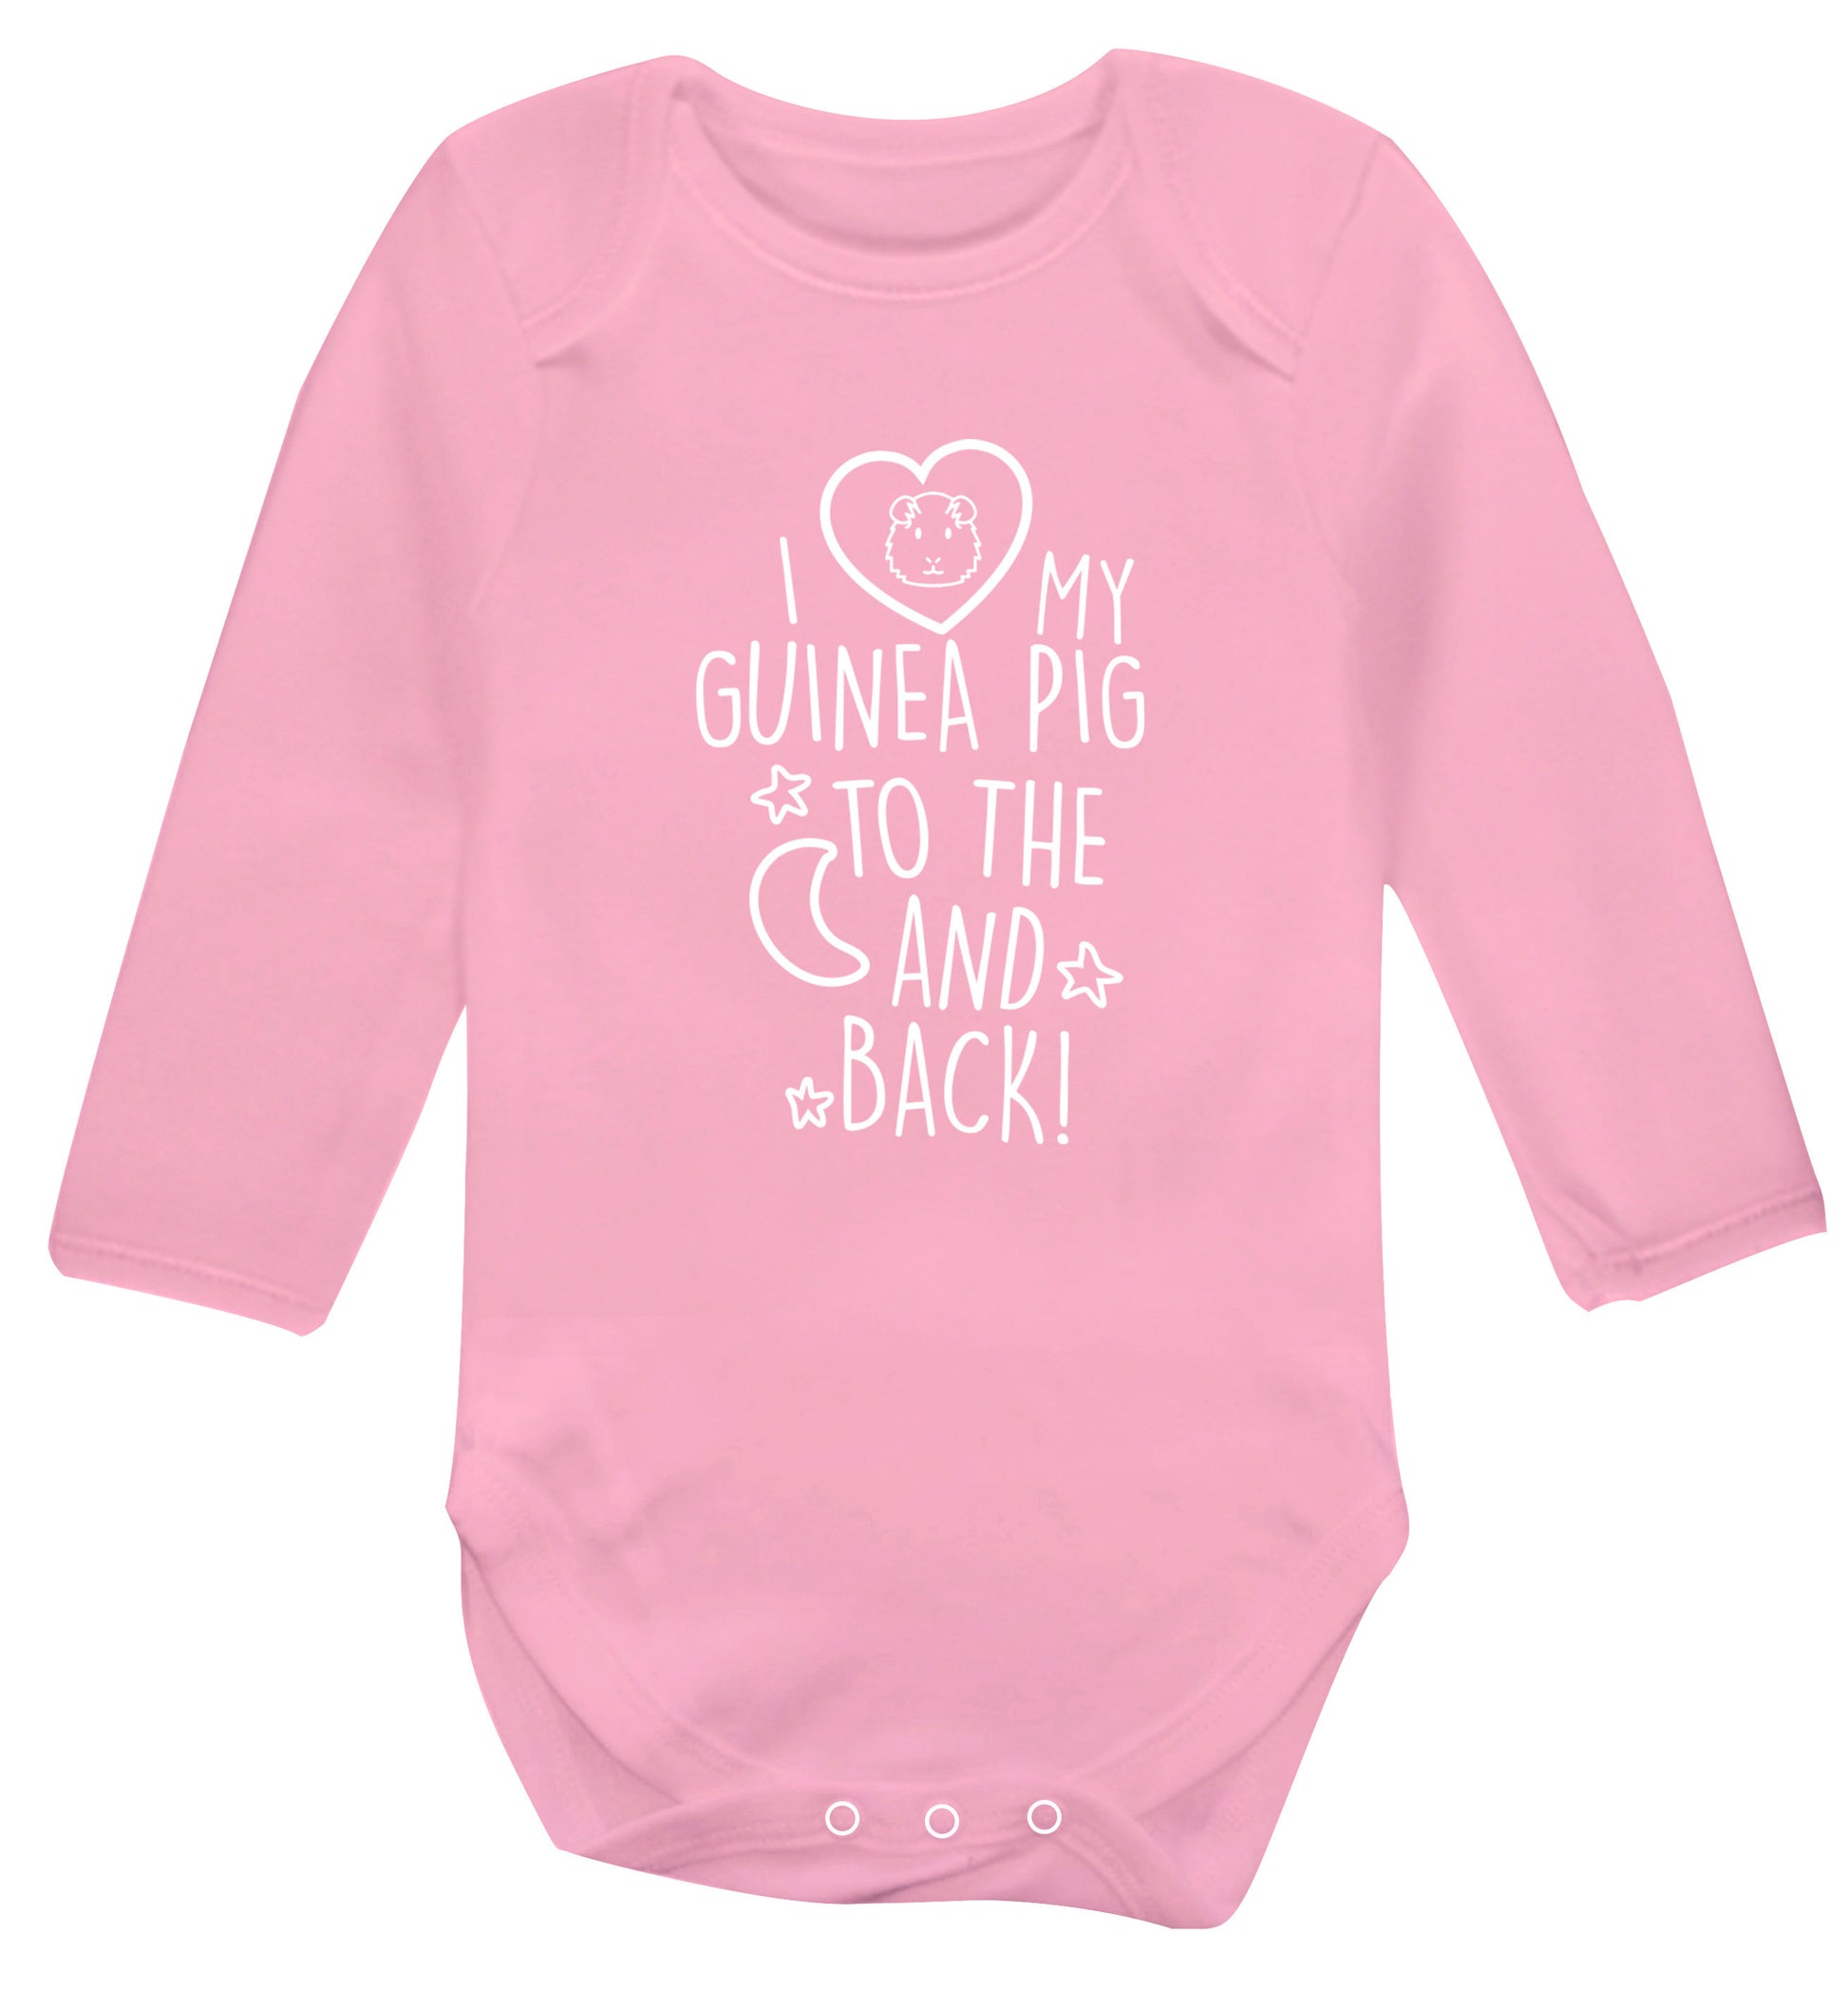 I love my guinea pig to the moon and back Baby Vest long sleeved pale pink 6-12 months